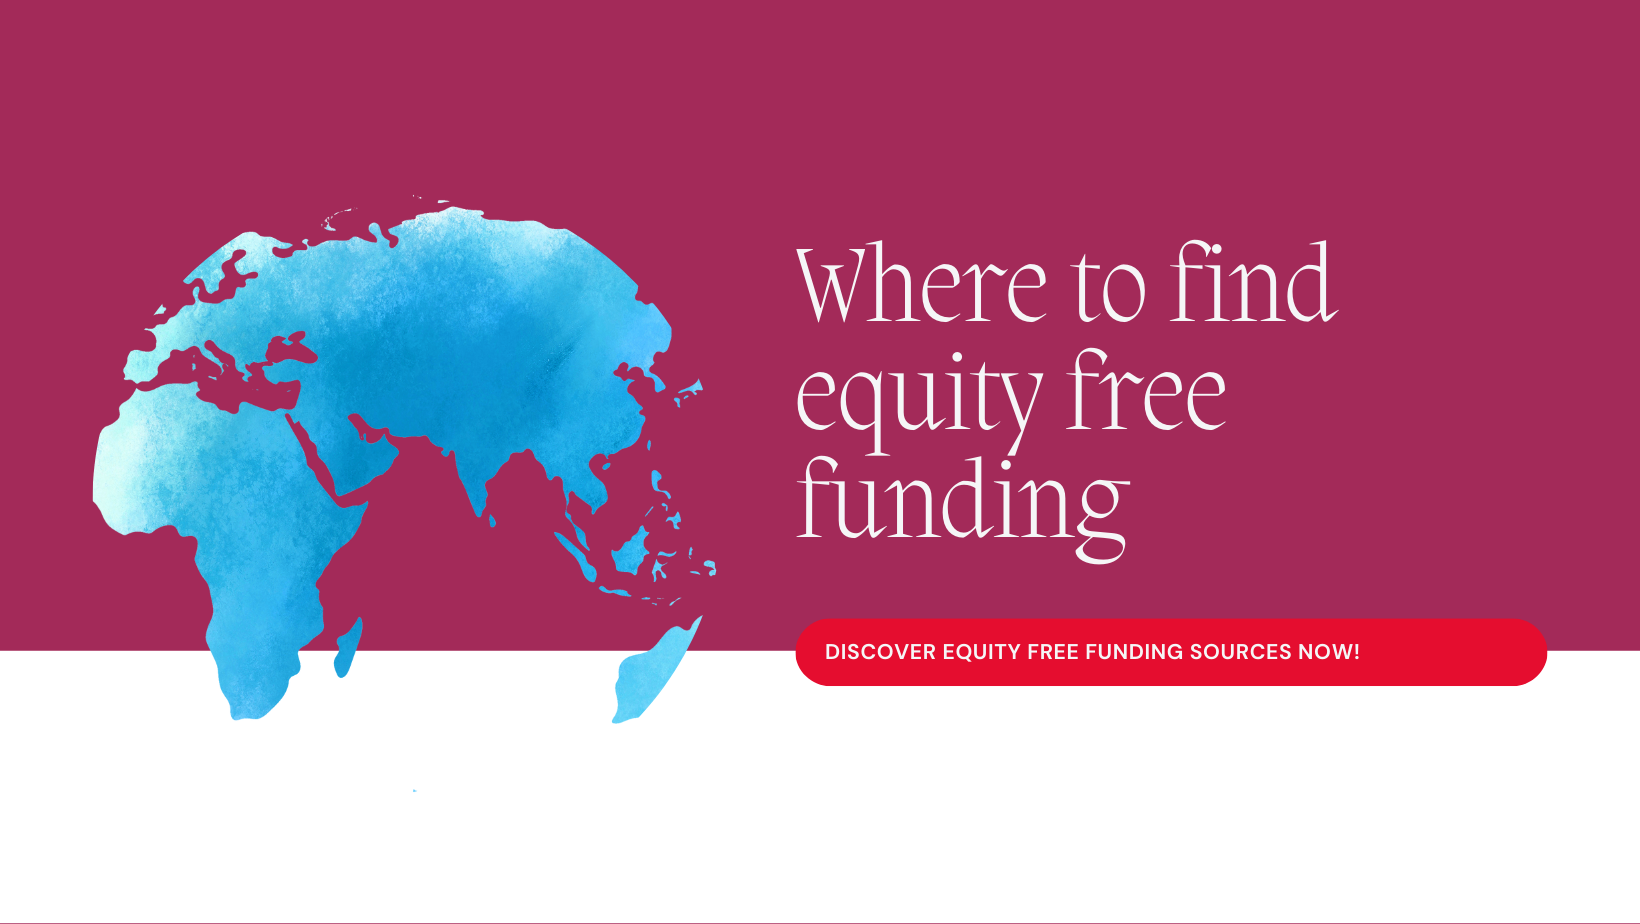 Where to find equity-free funding